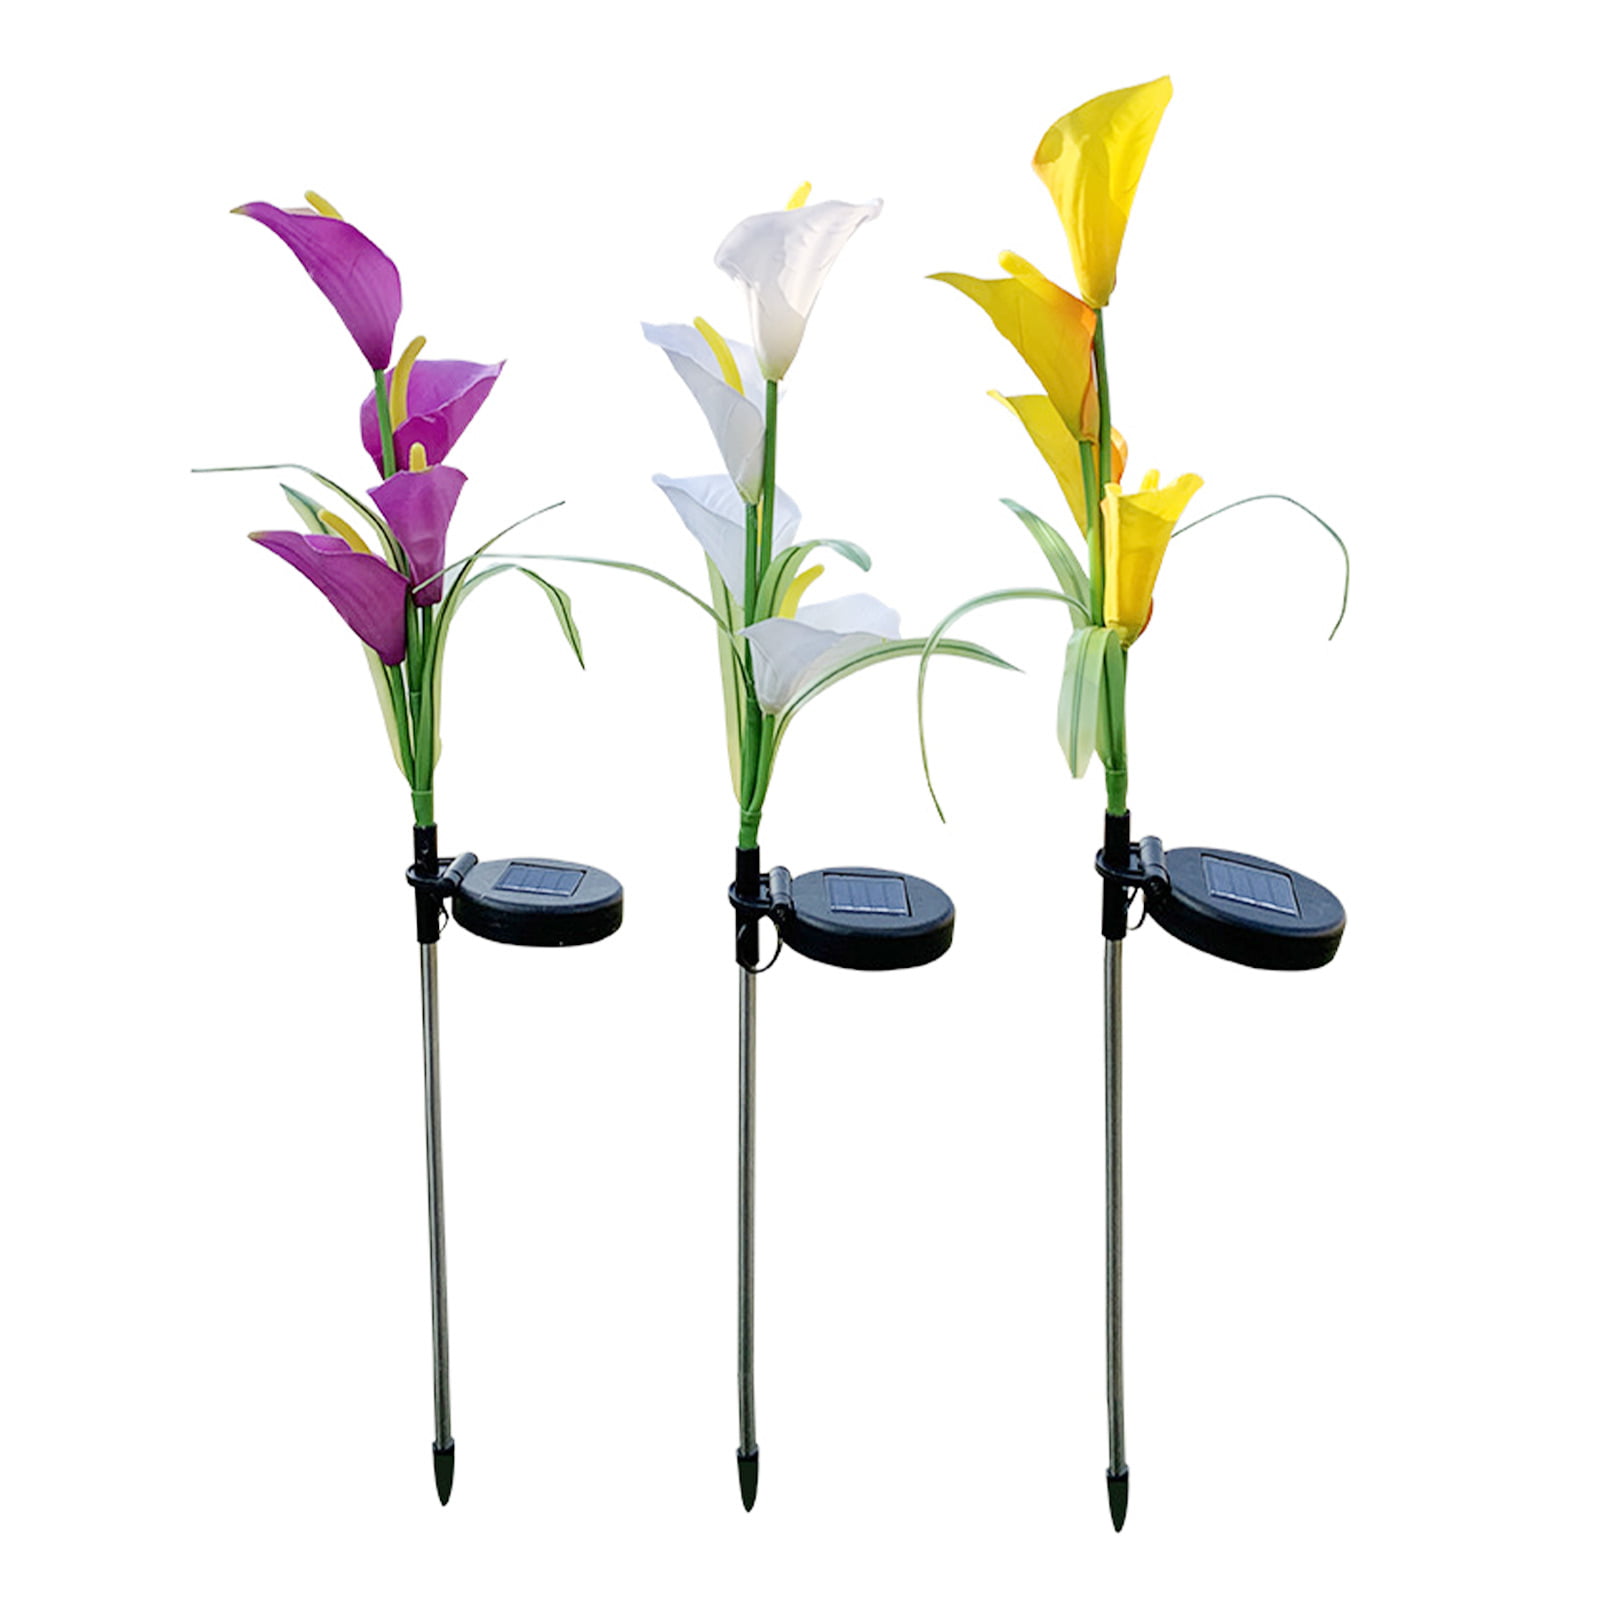 Details about   Waterproof Solar Power Garden Flower LED Stake Lights Lily Rose Outdoor Lights 